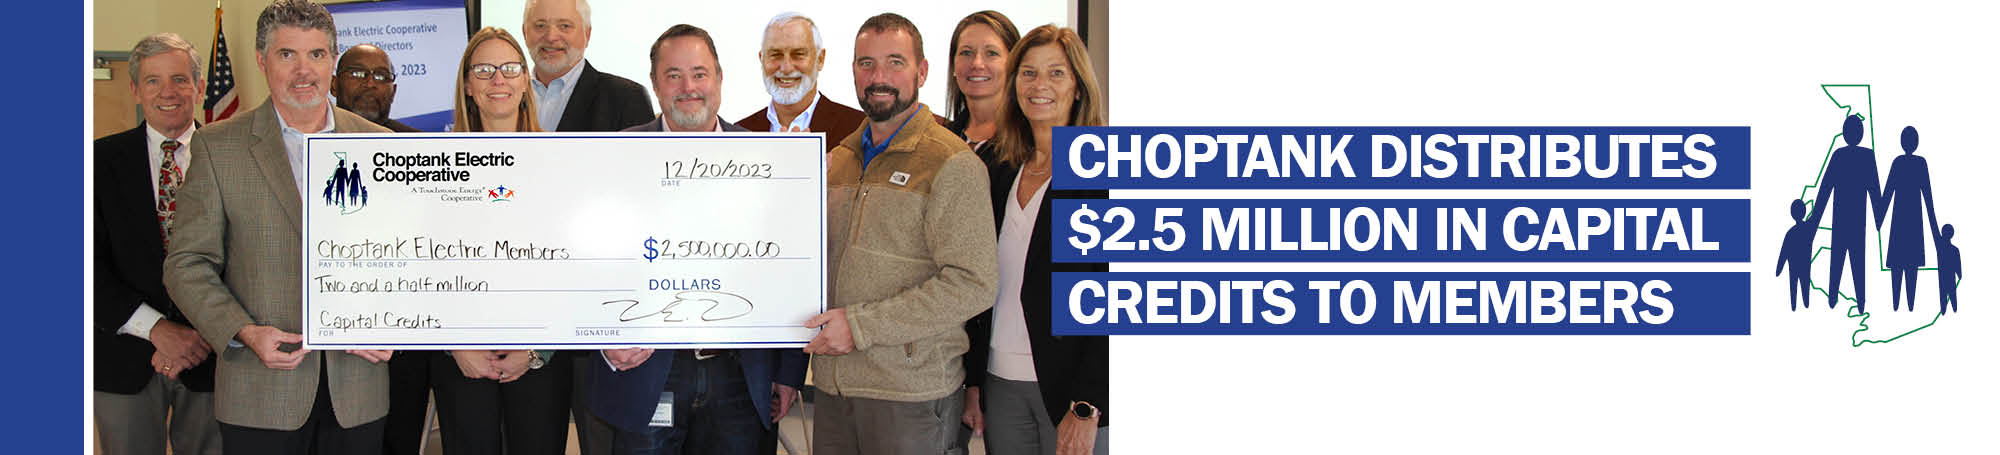 Choptank Distributes 2.5 Million in Capital Credits to Members